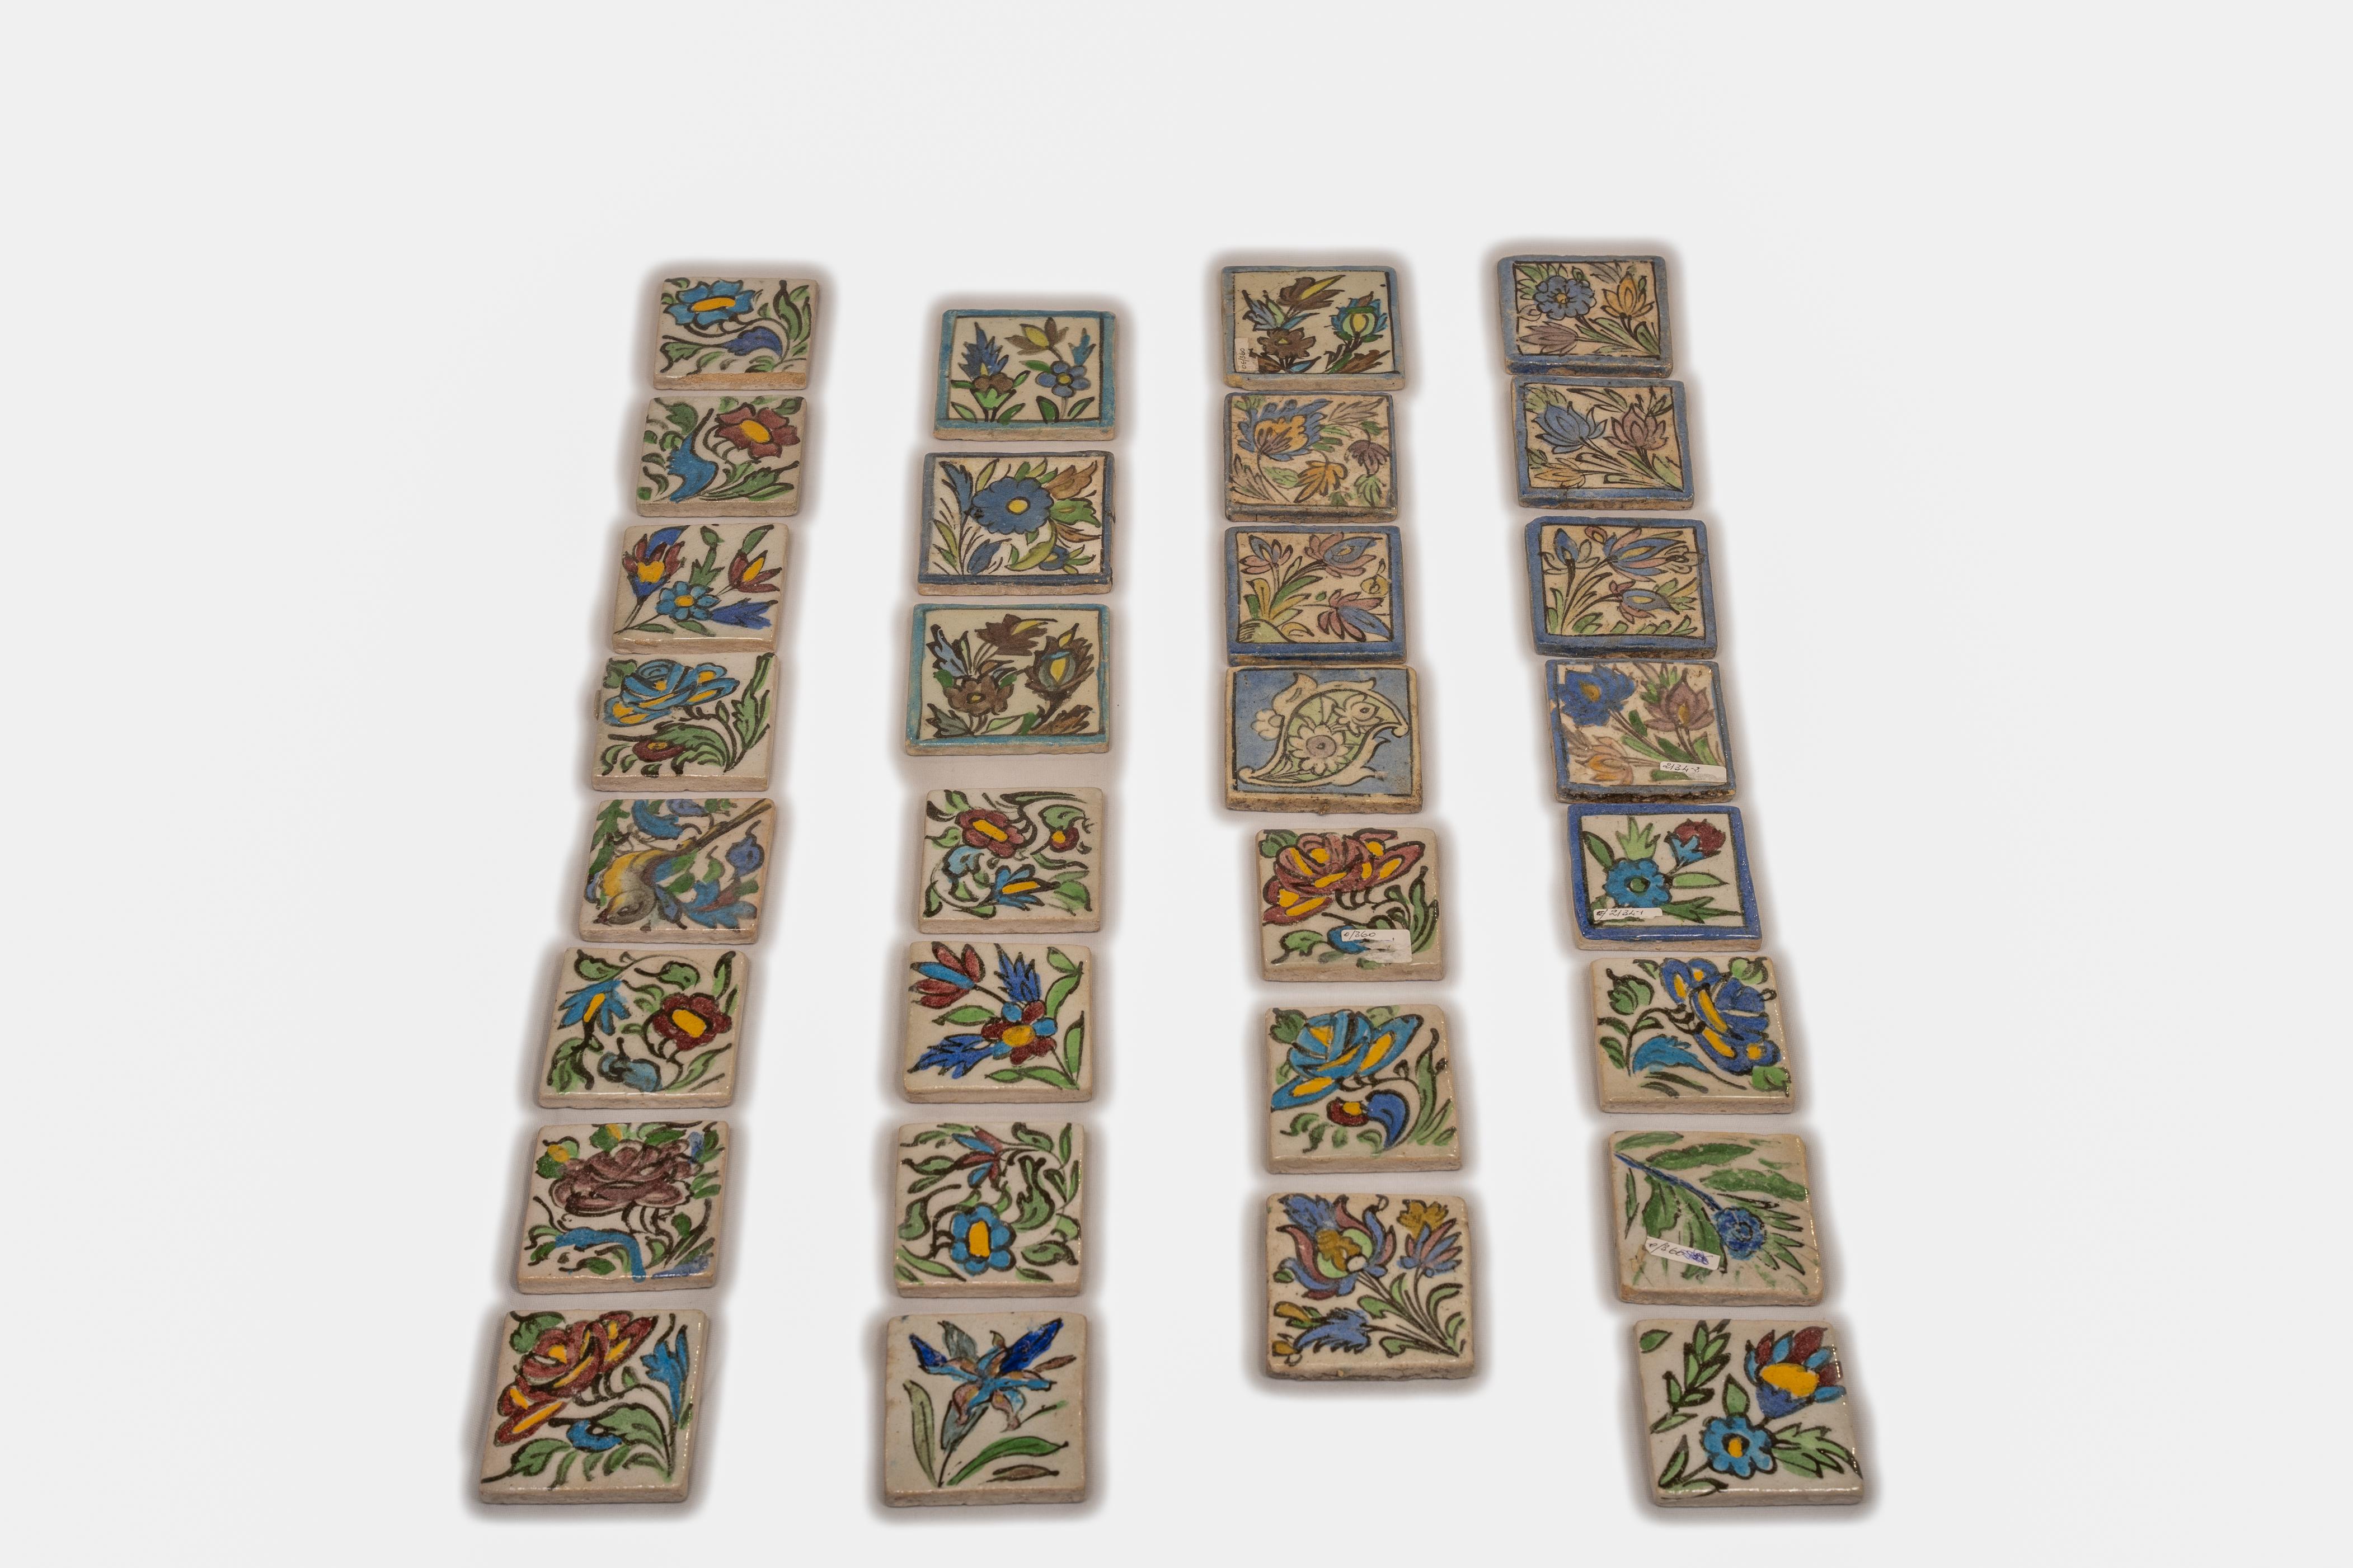 Series of small antique Persian tiles, hand painted, to be used perhaps as a border on a simple white wall.
There are other bigger ones, not yet photographed.
Think about how to use them: I used on the garden wall, but also for a kitchen.
Their